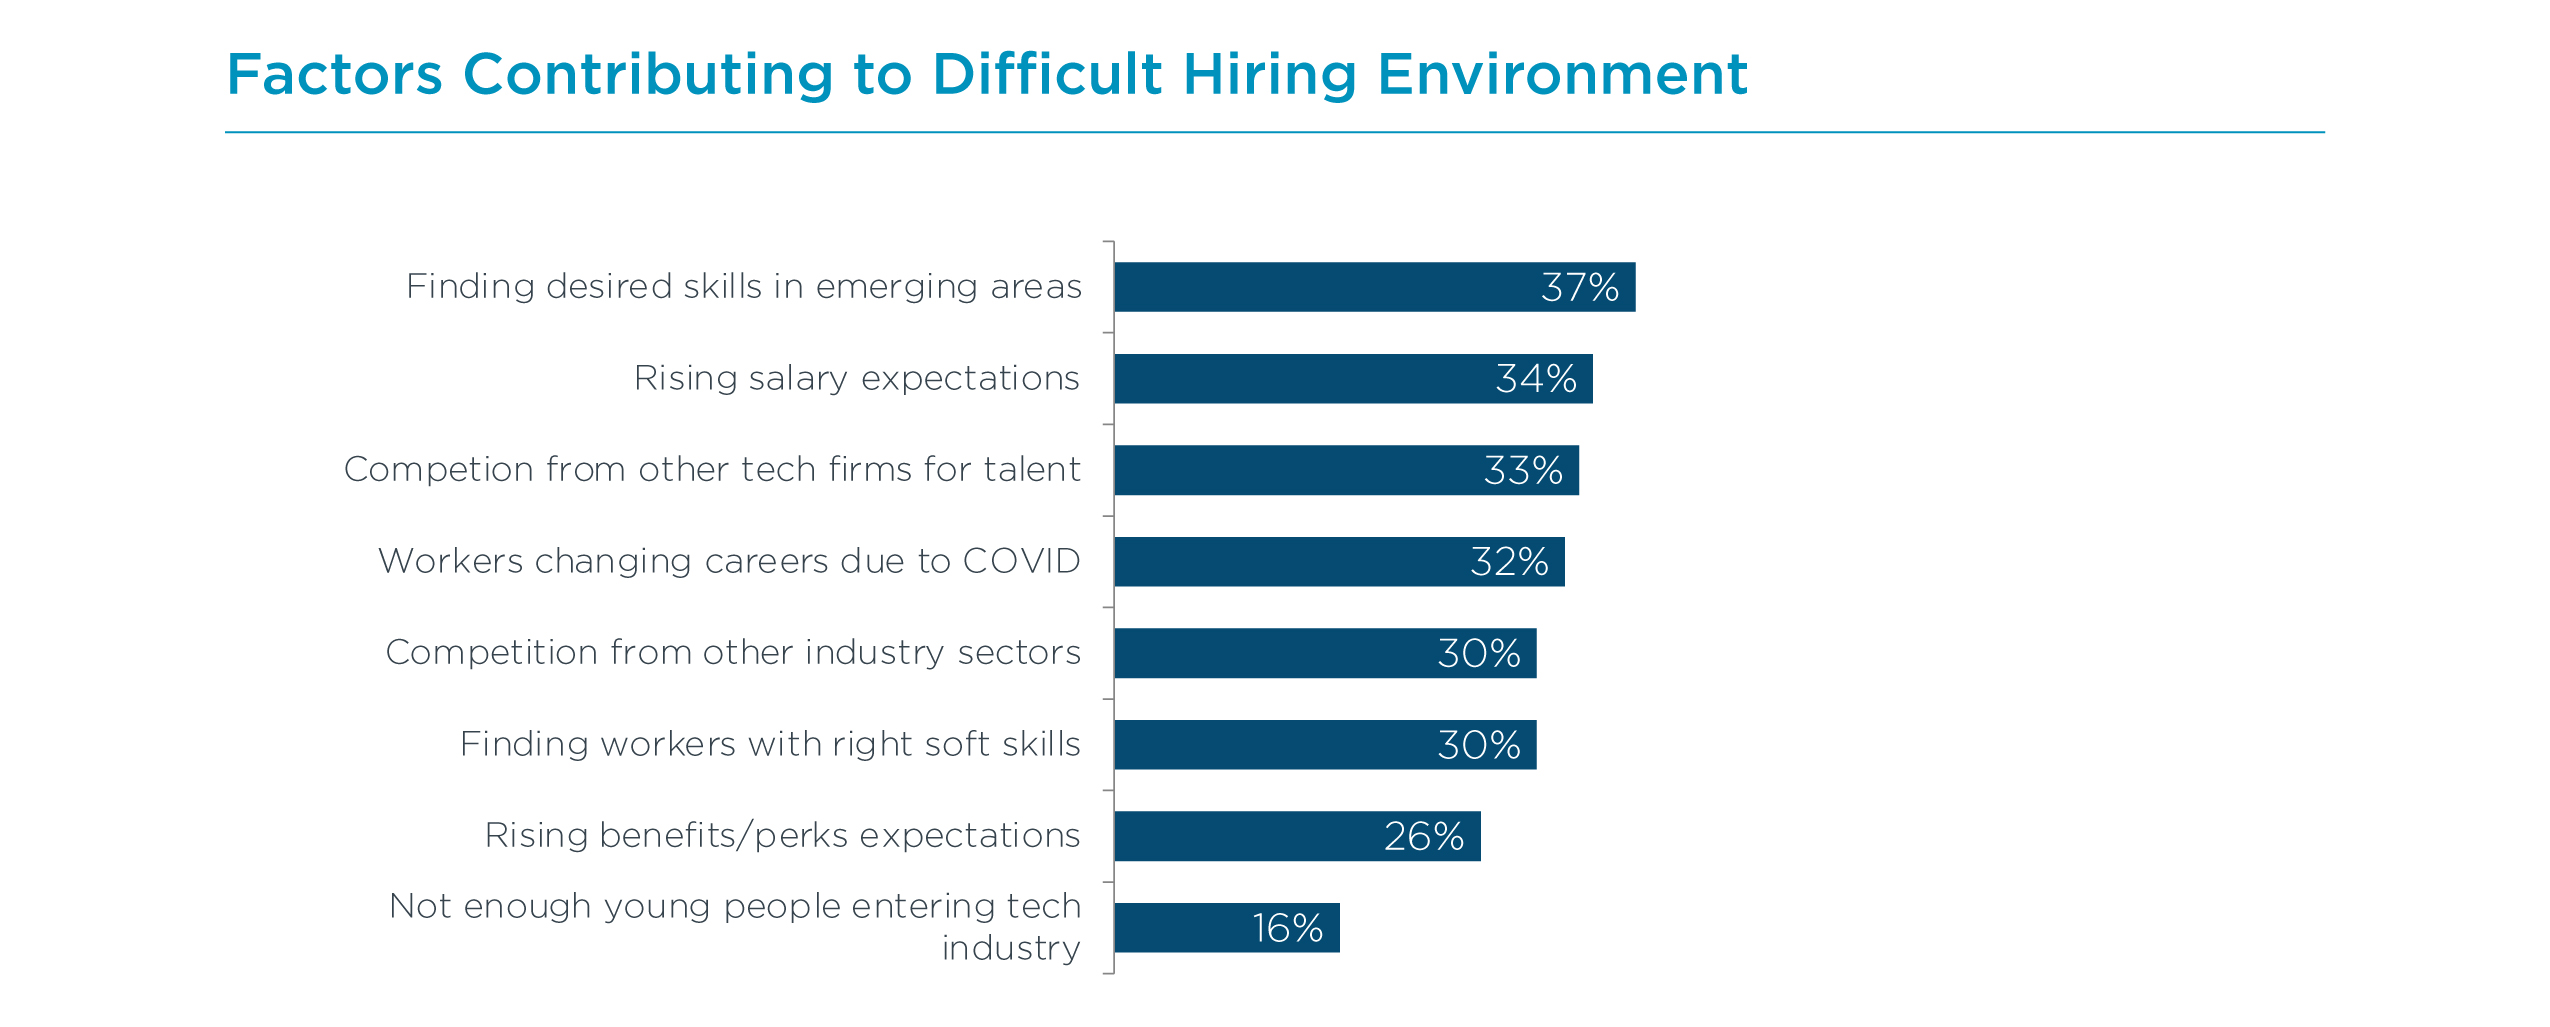 Factors Contributing to Difficult Hiring Environment